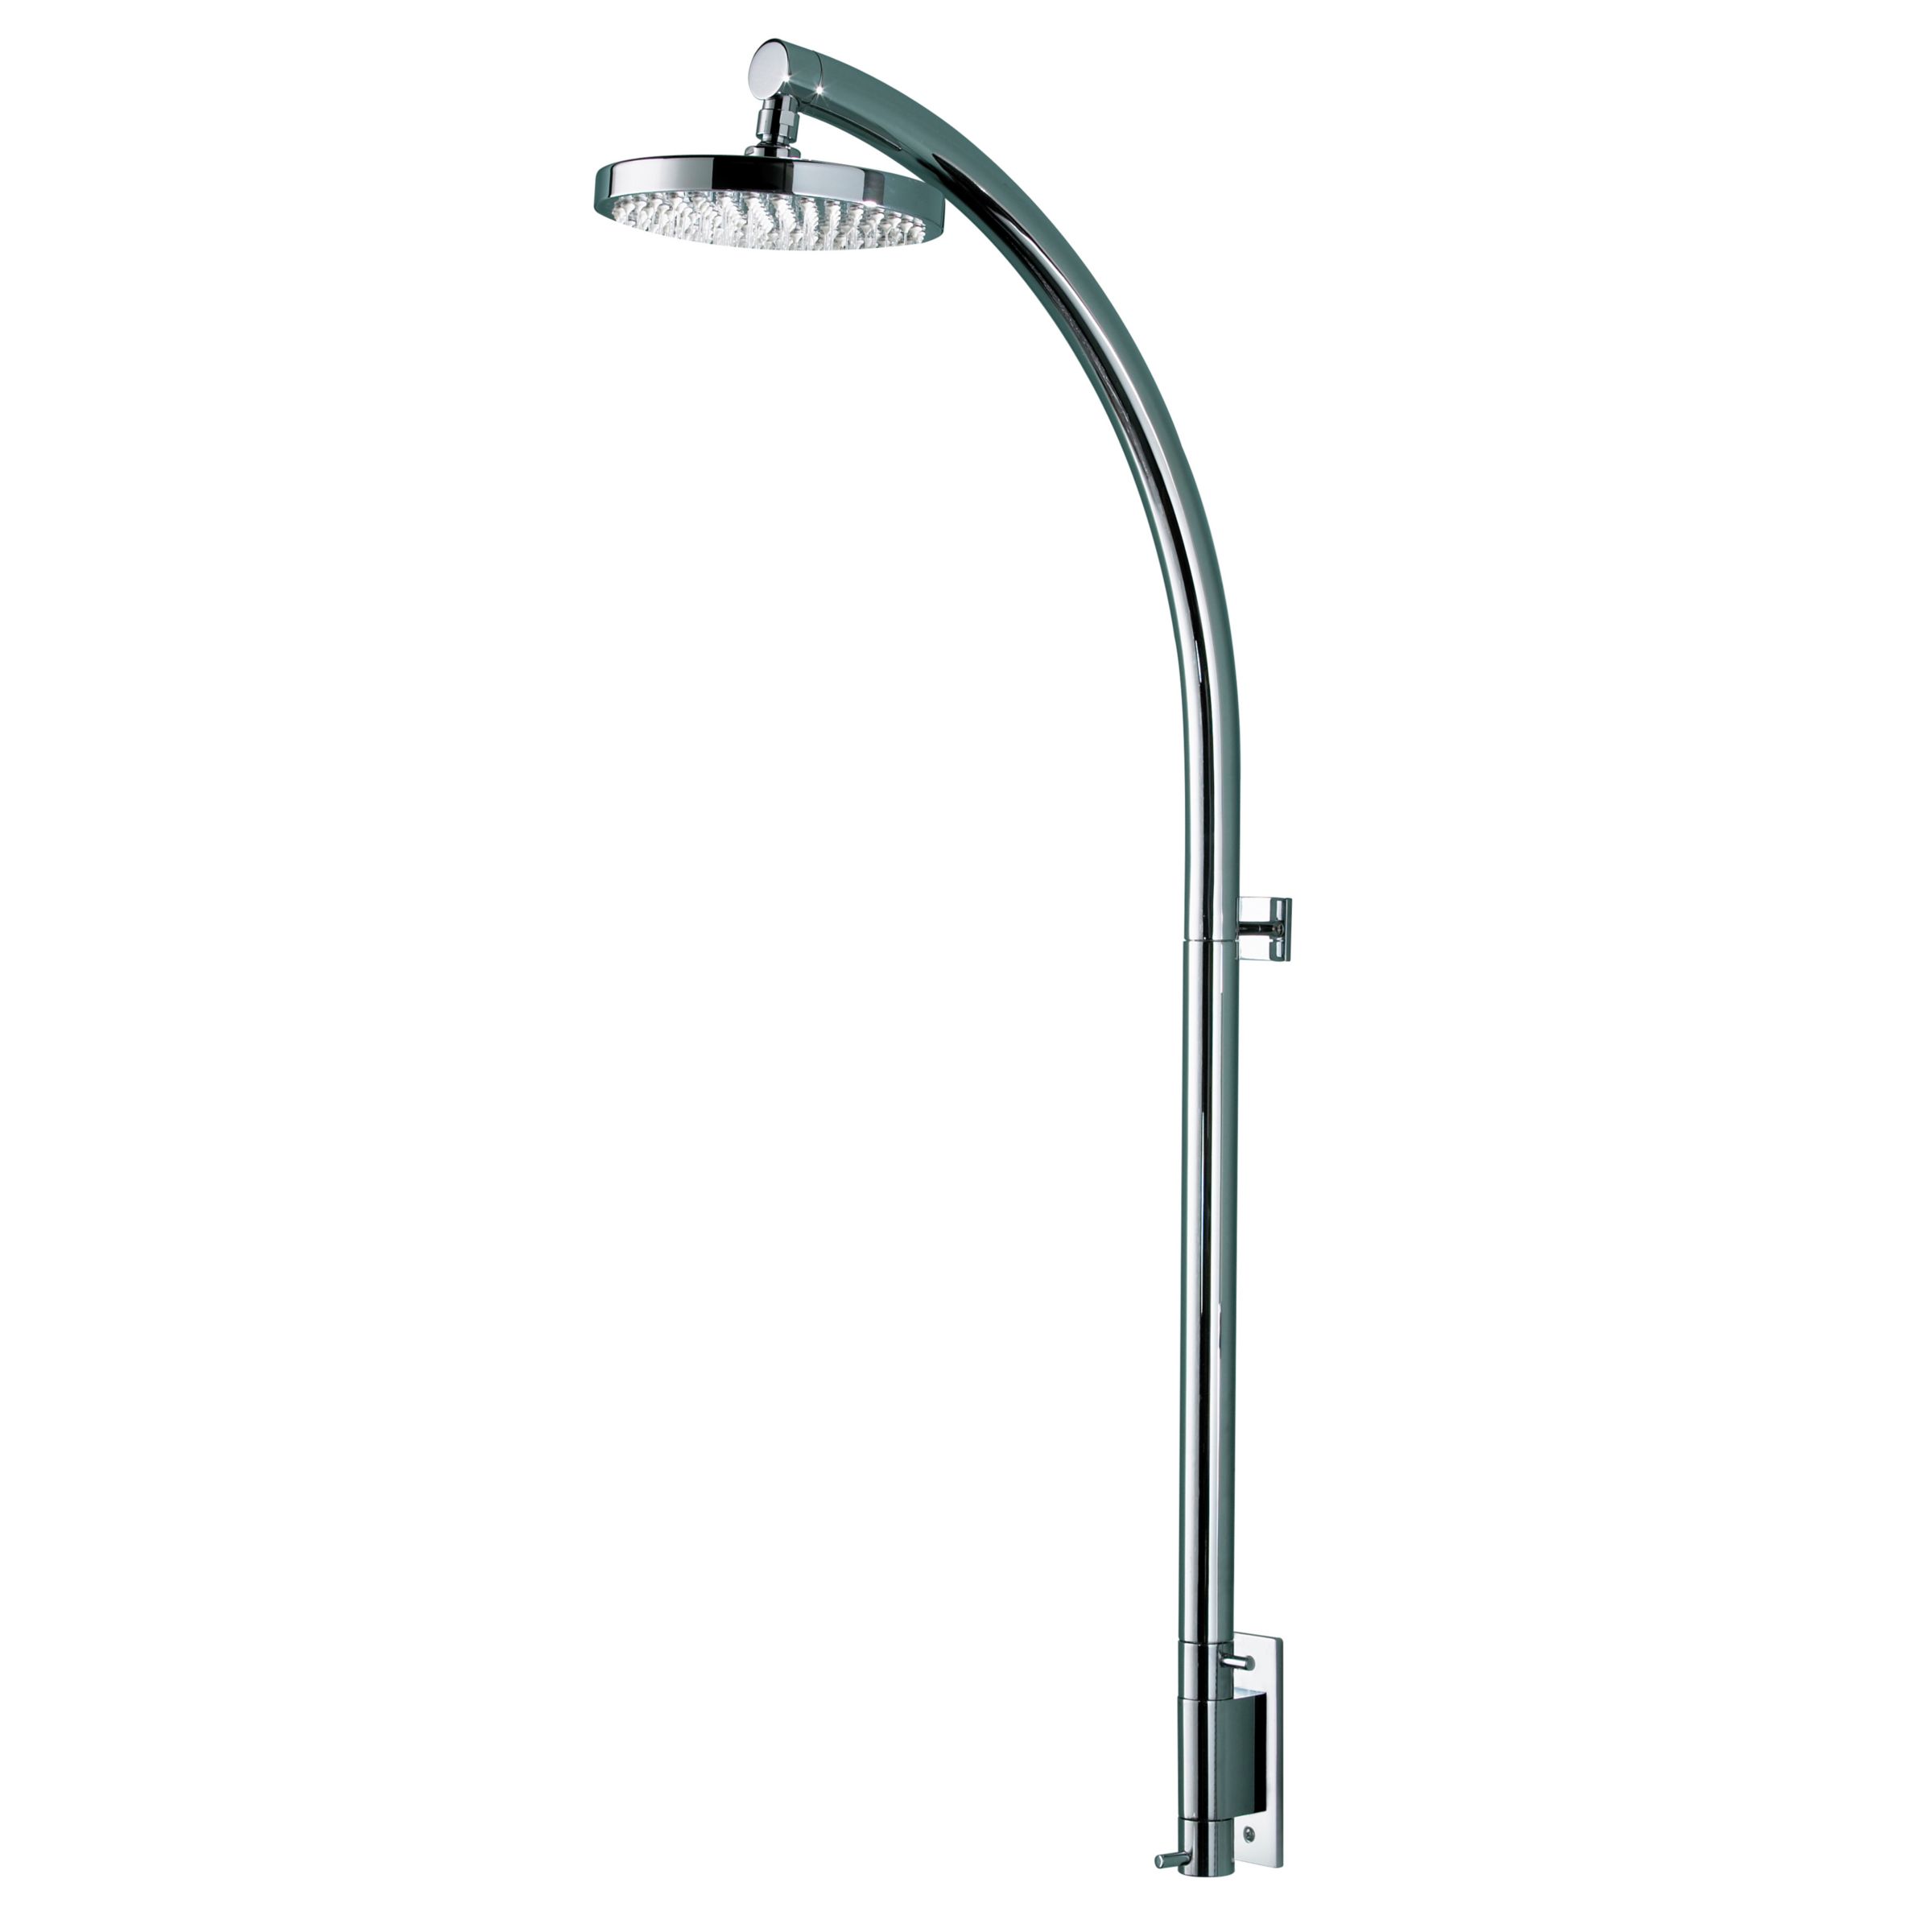 Bristan Prism In-line Vertical Shower Pole with Fixed Head at JohnLewis